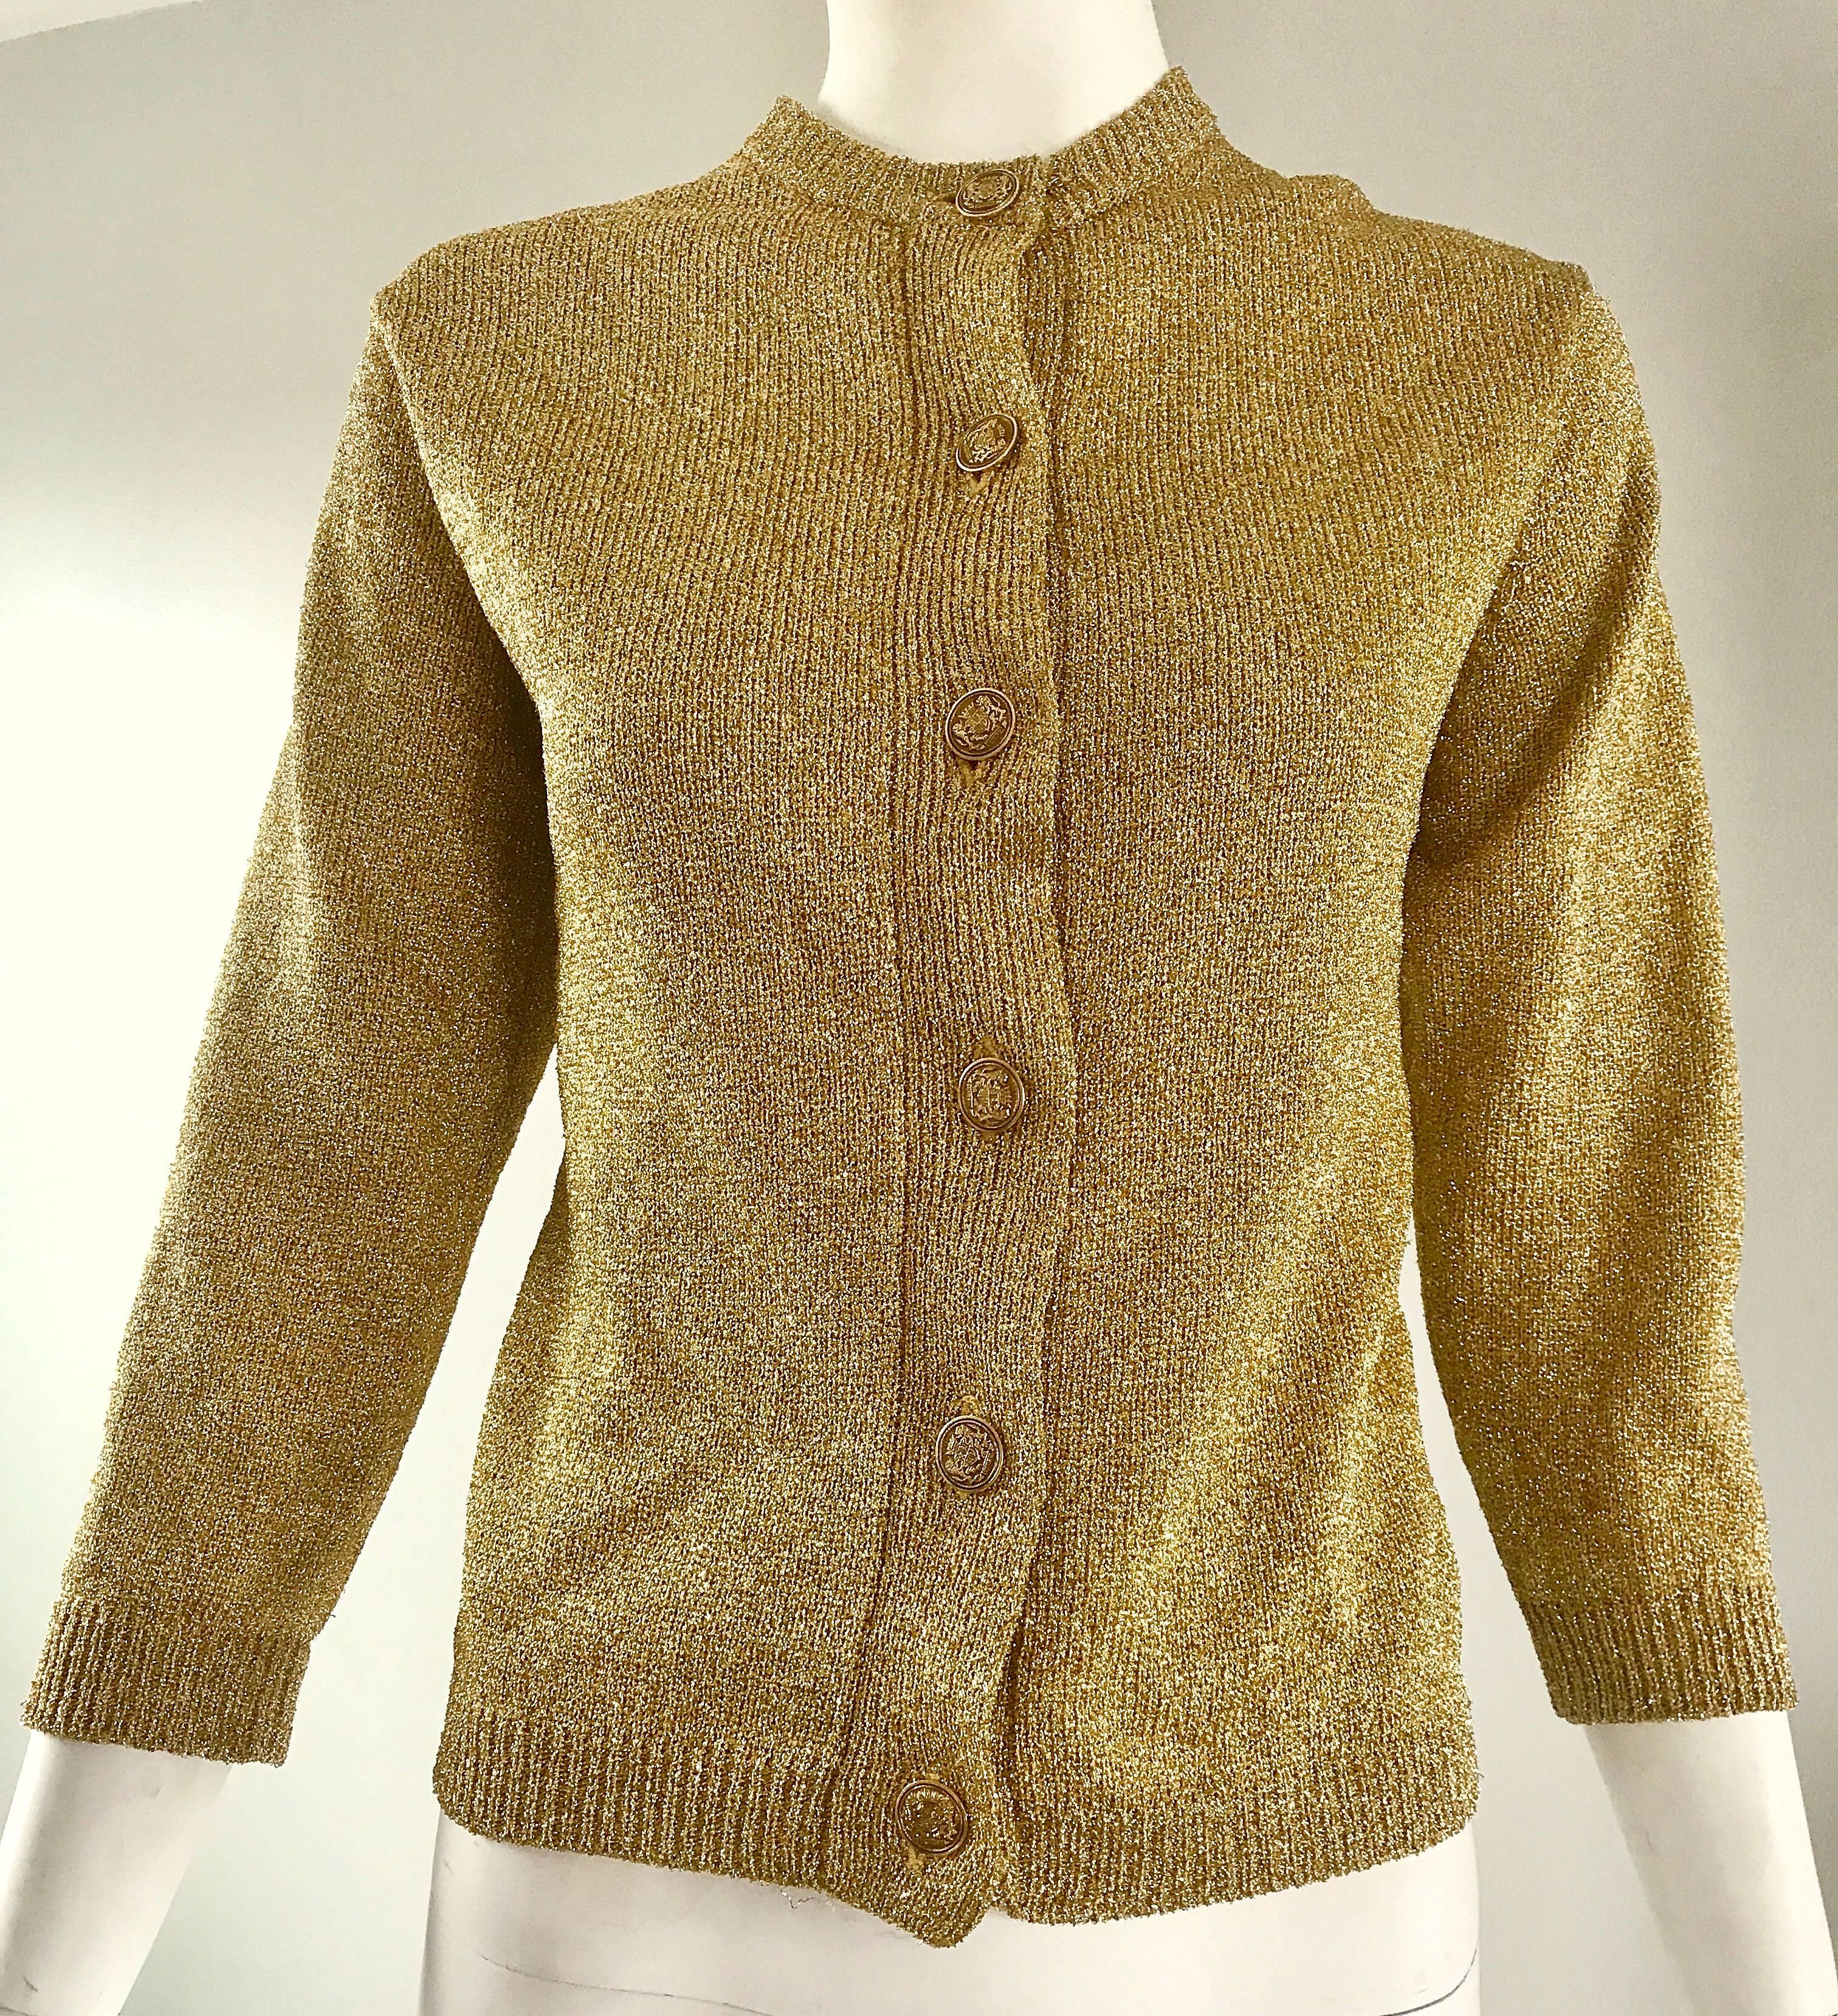 Women's 1950s Gold Metallic Lurex 3/4 Sleeves French Made Vintage 50s Cardigan Sweater For Sale